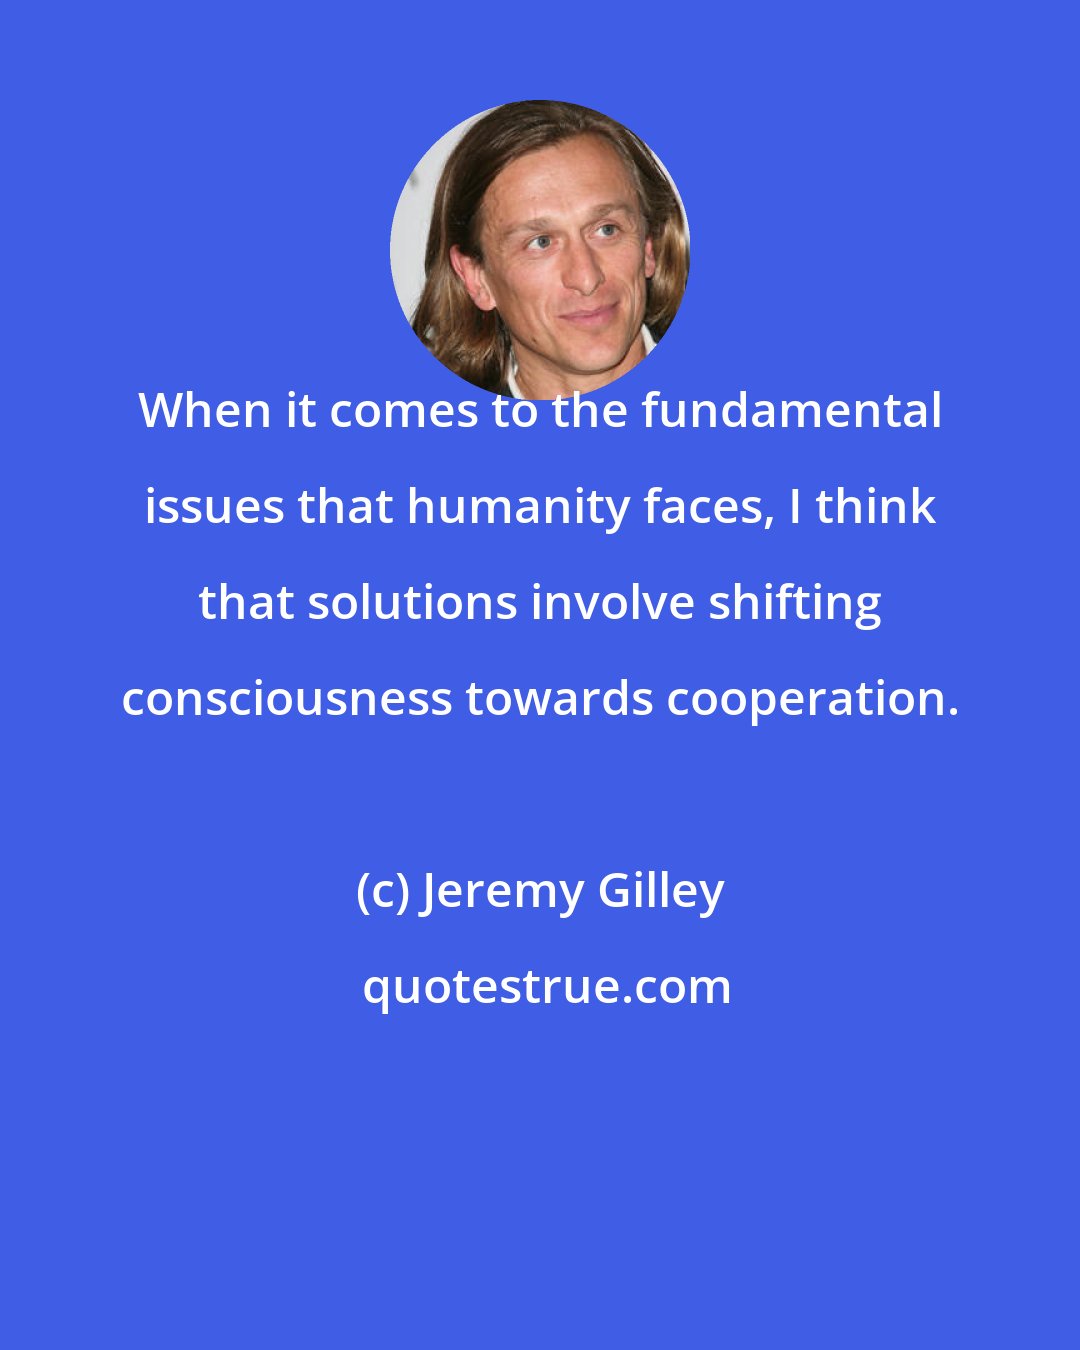 Jeremy Gilley: When it comes to the fundamental issues that humanity faces, I think that solutions involve shifting consciousness towards cooperation.